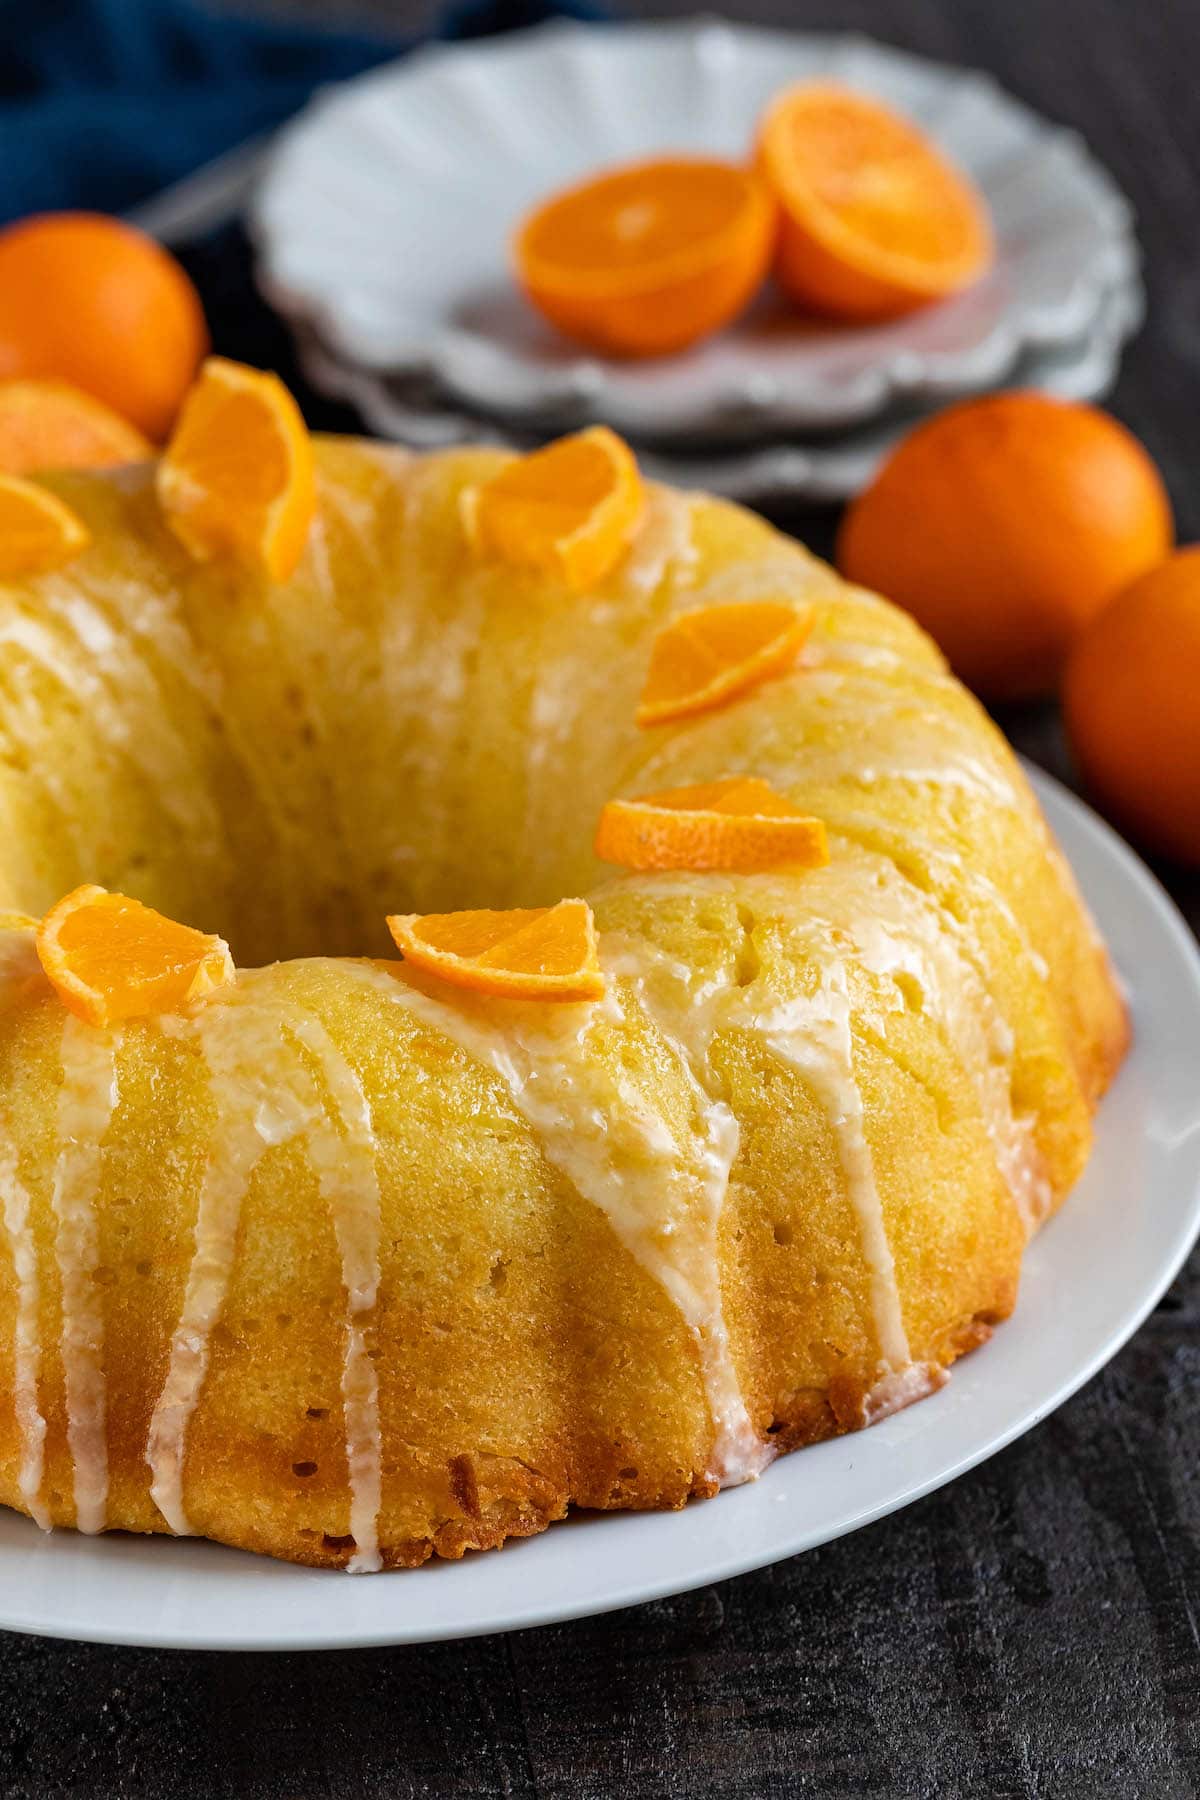 orange bundt cake with sliced oranges and icing on top on a white plate.